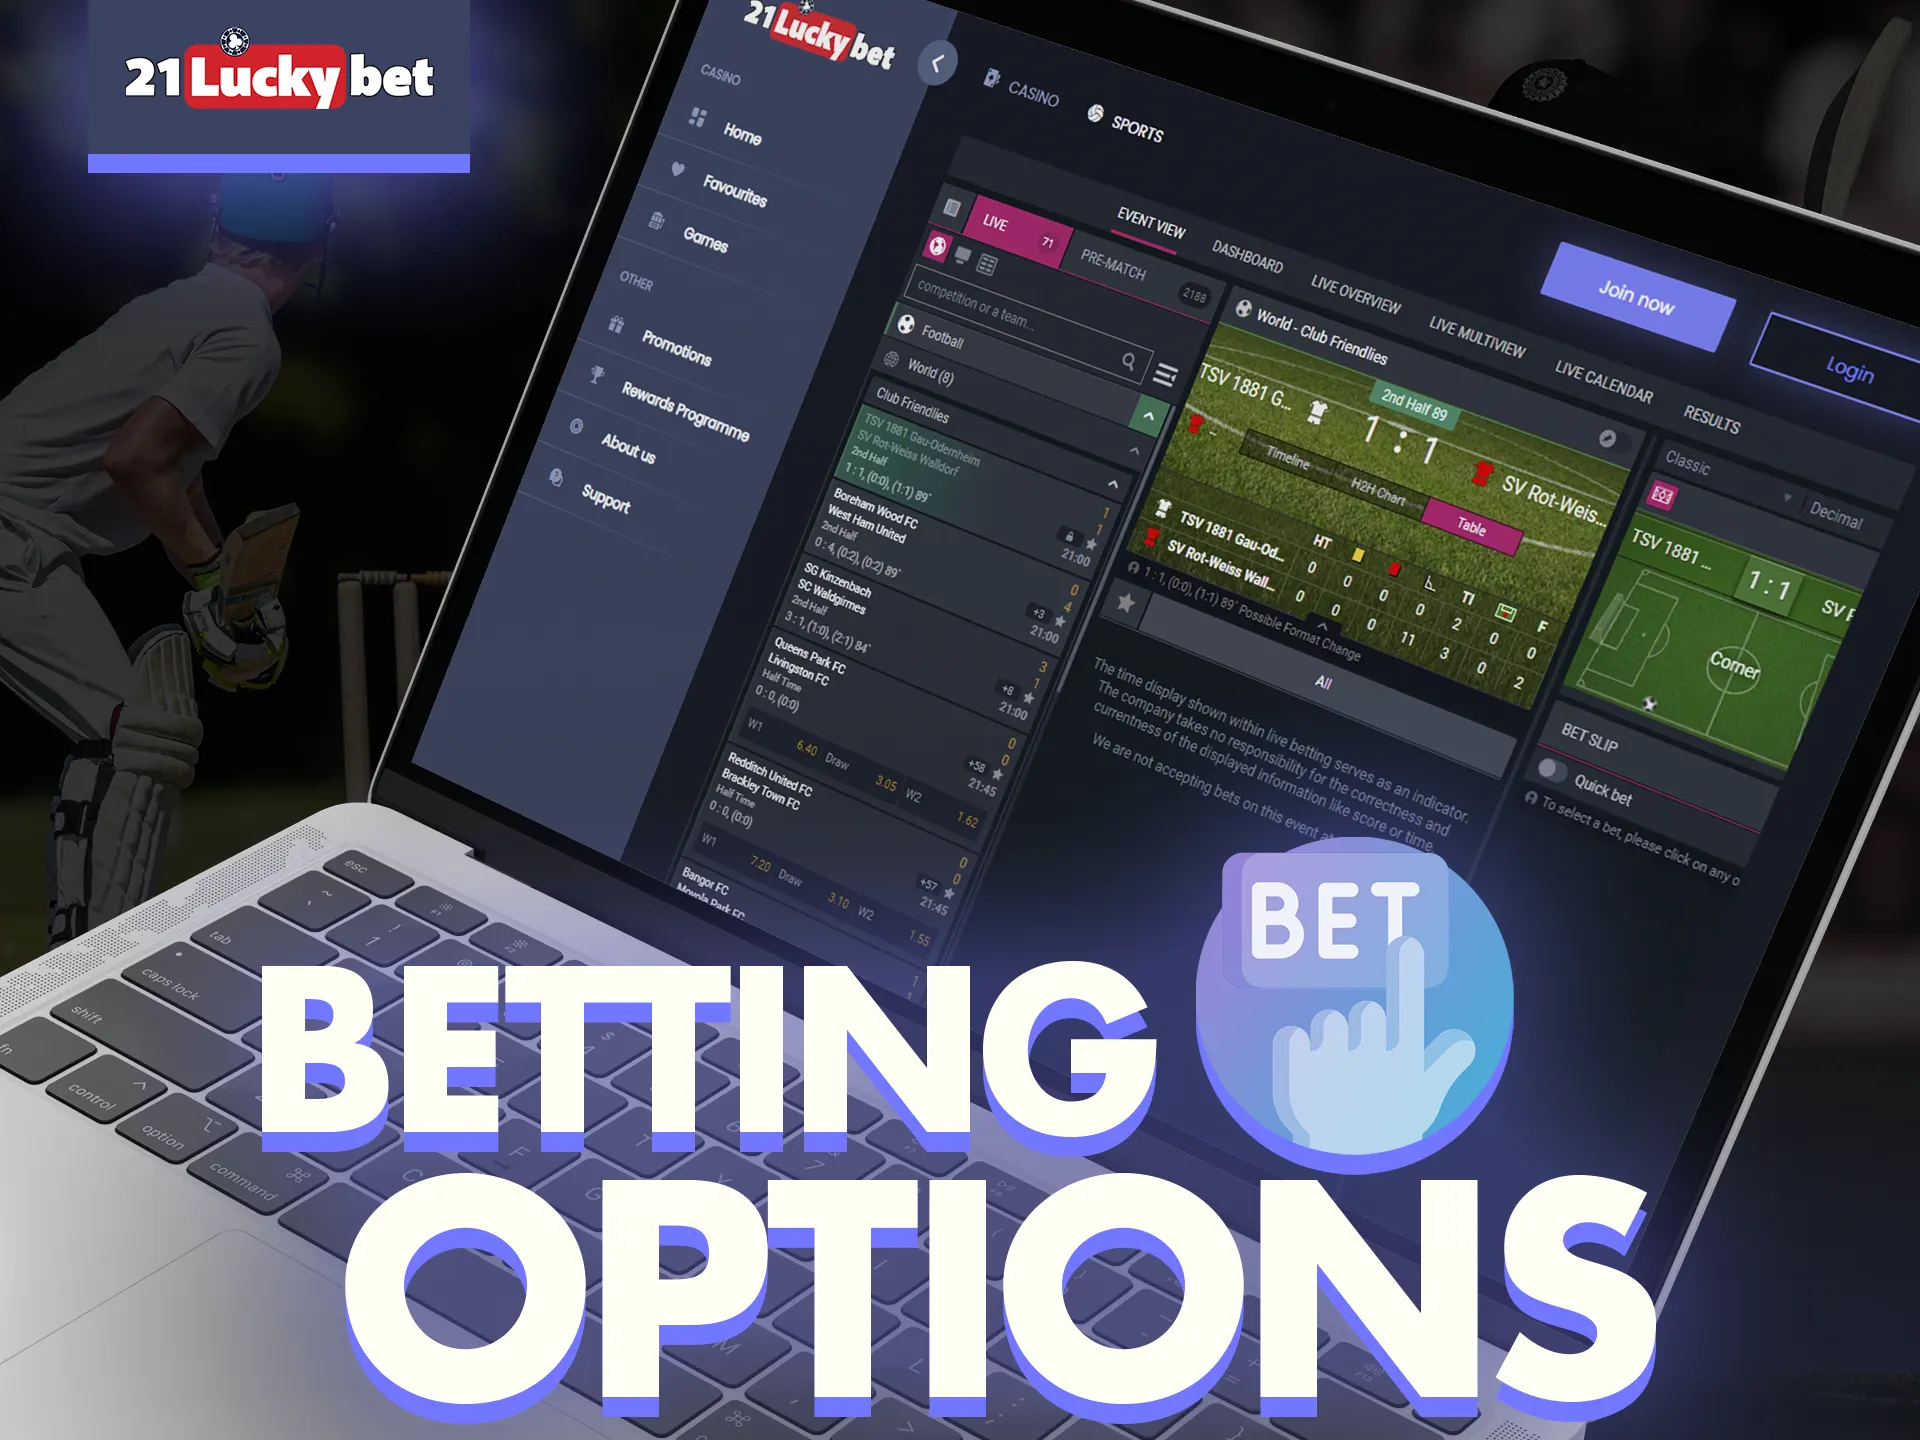 With 21luckybet try different betting options for sport.